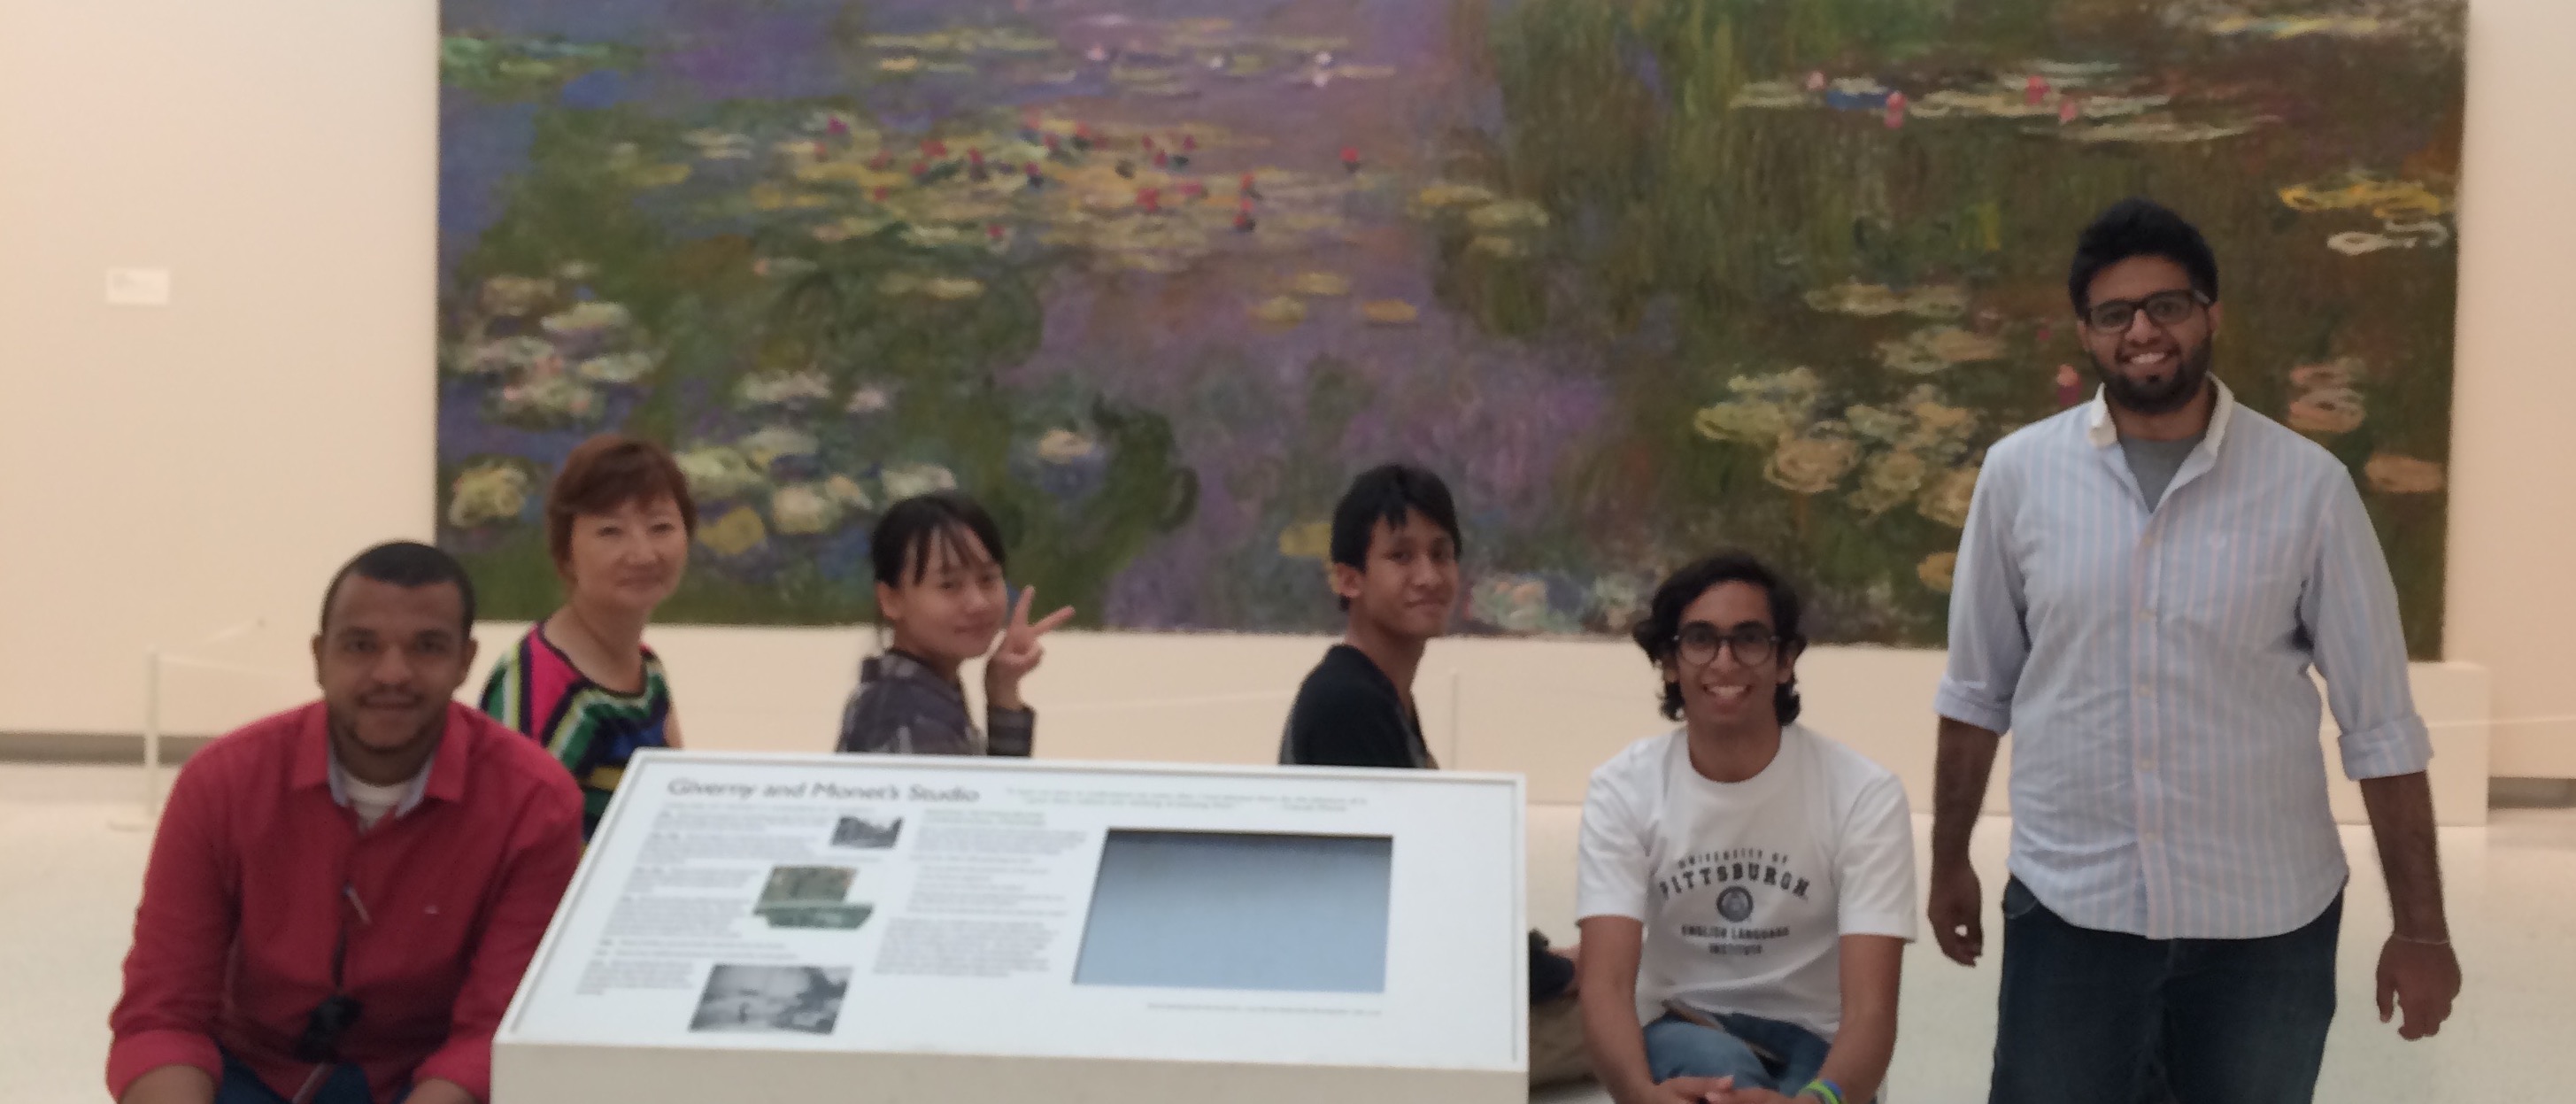 Students at the Carnegie Museum of Art 